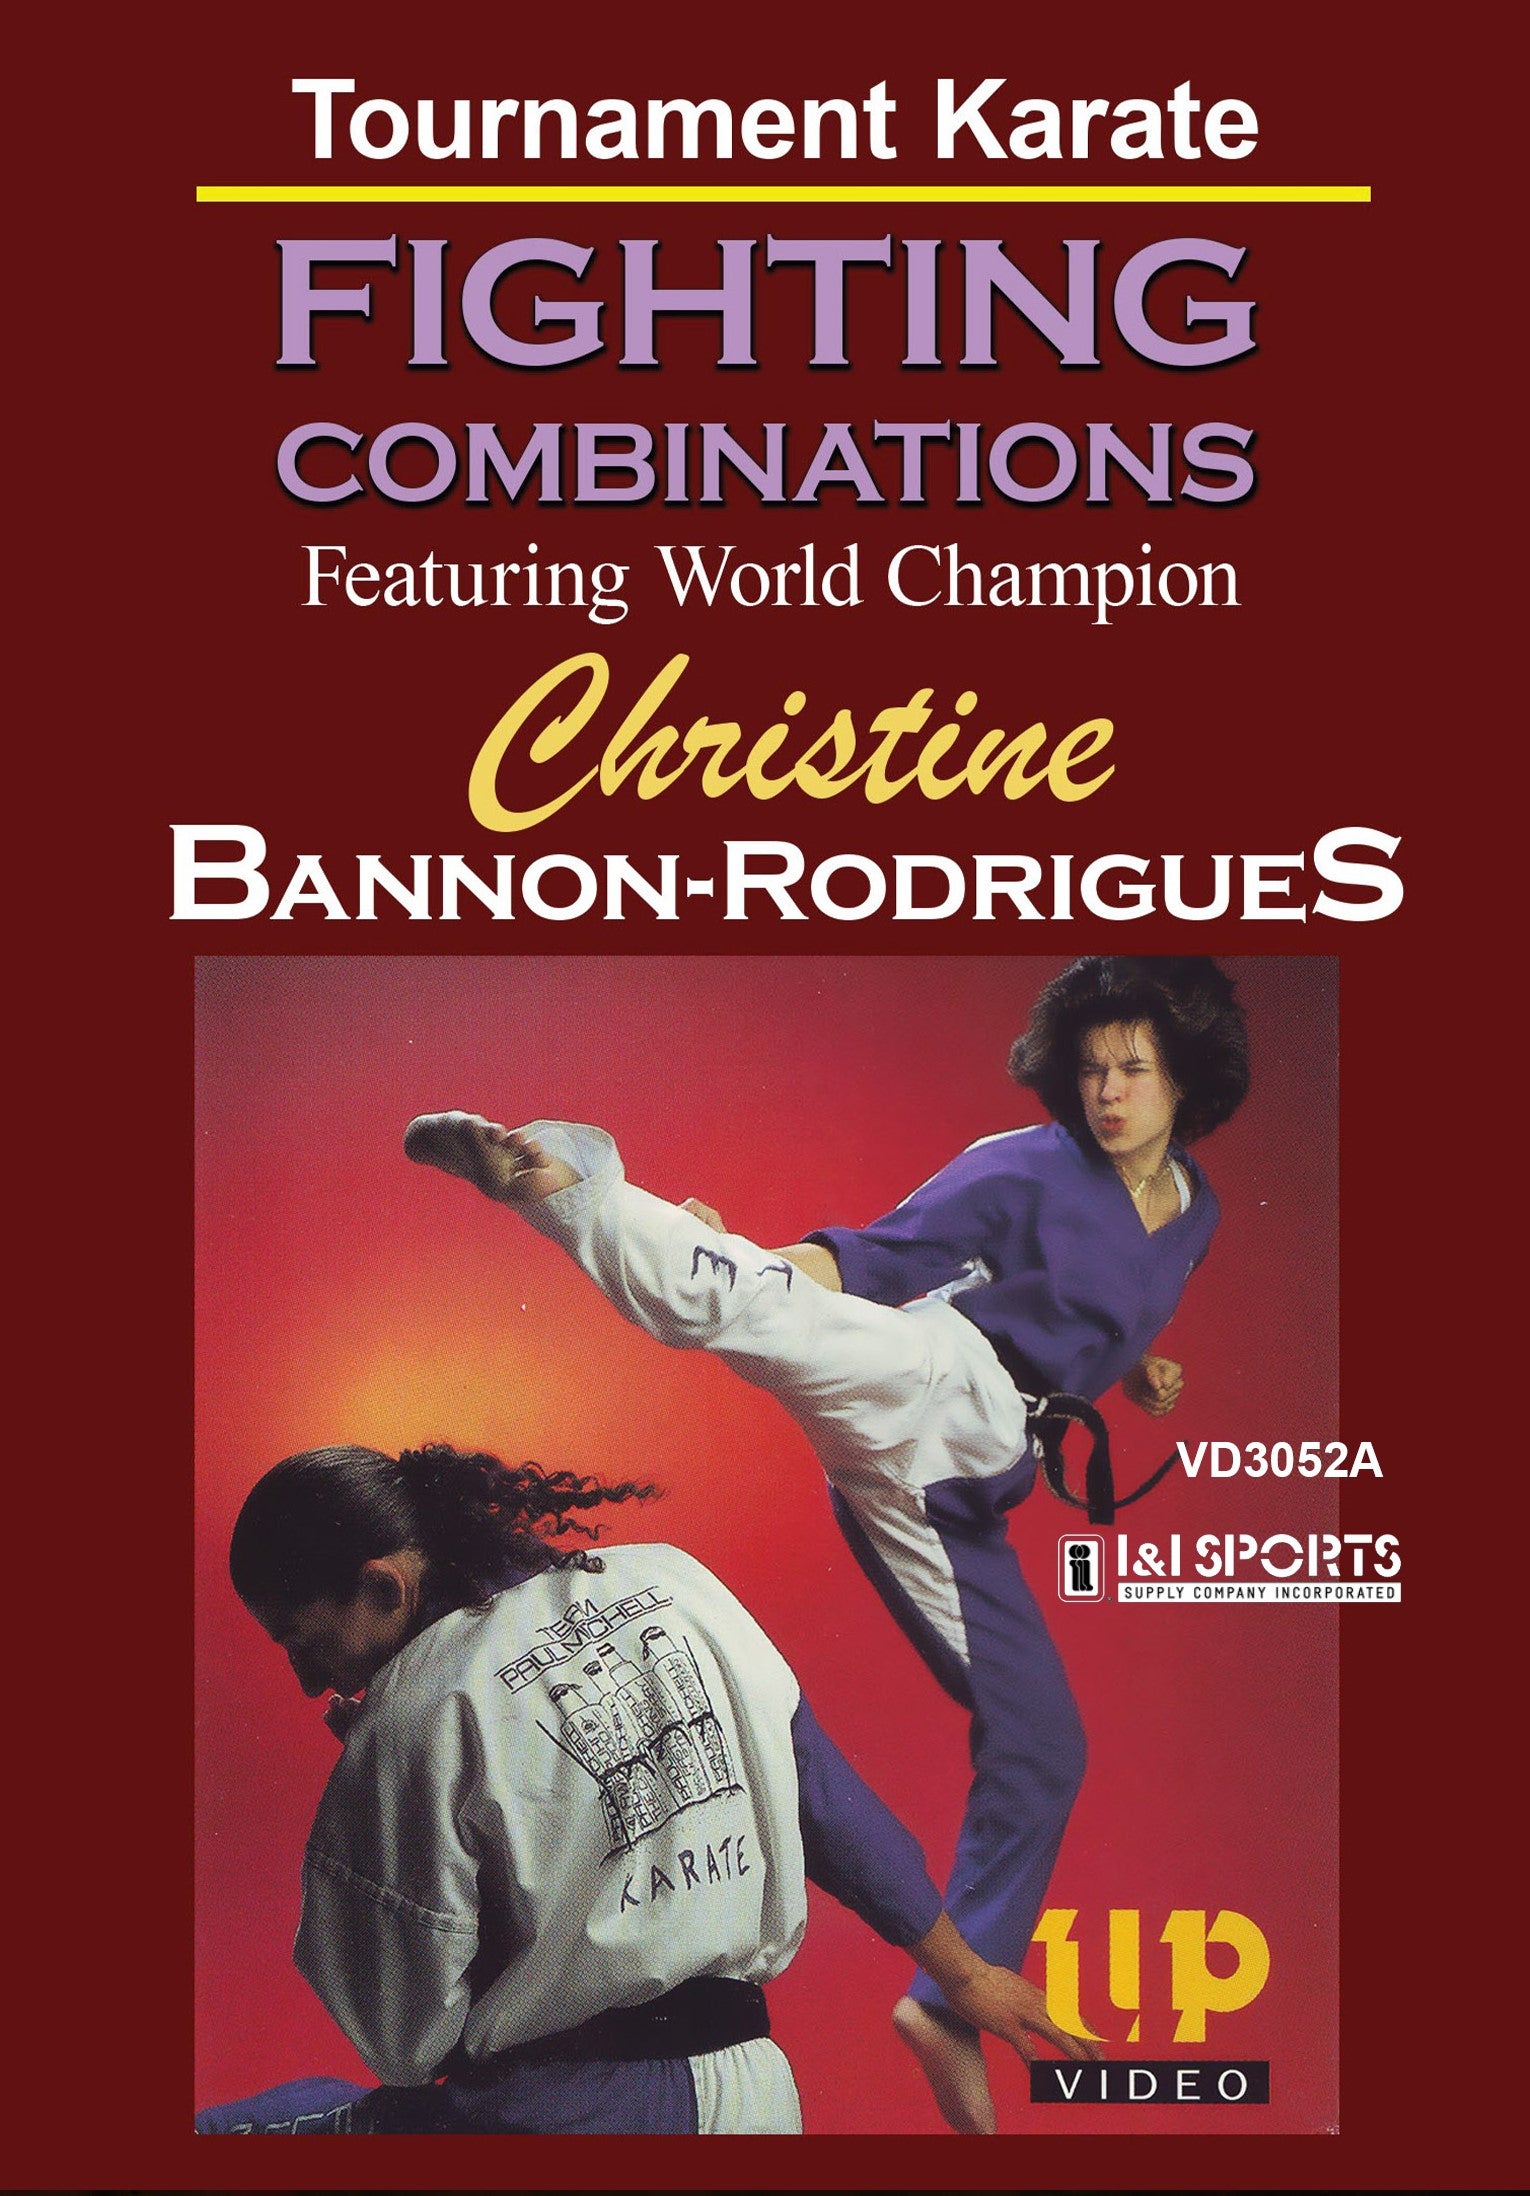 Champion Tournament Karate Fighting Combinations DVD Christine Bannon-Rodrigues